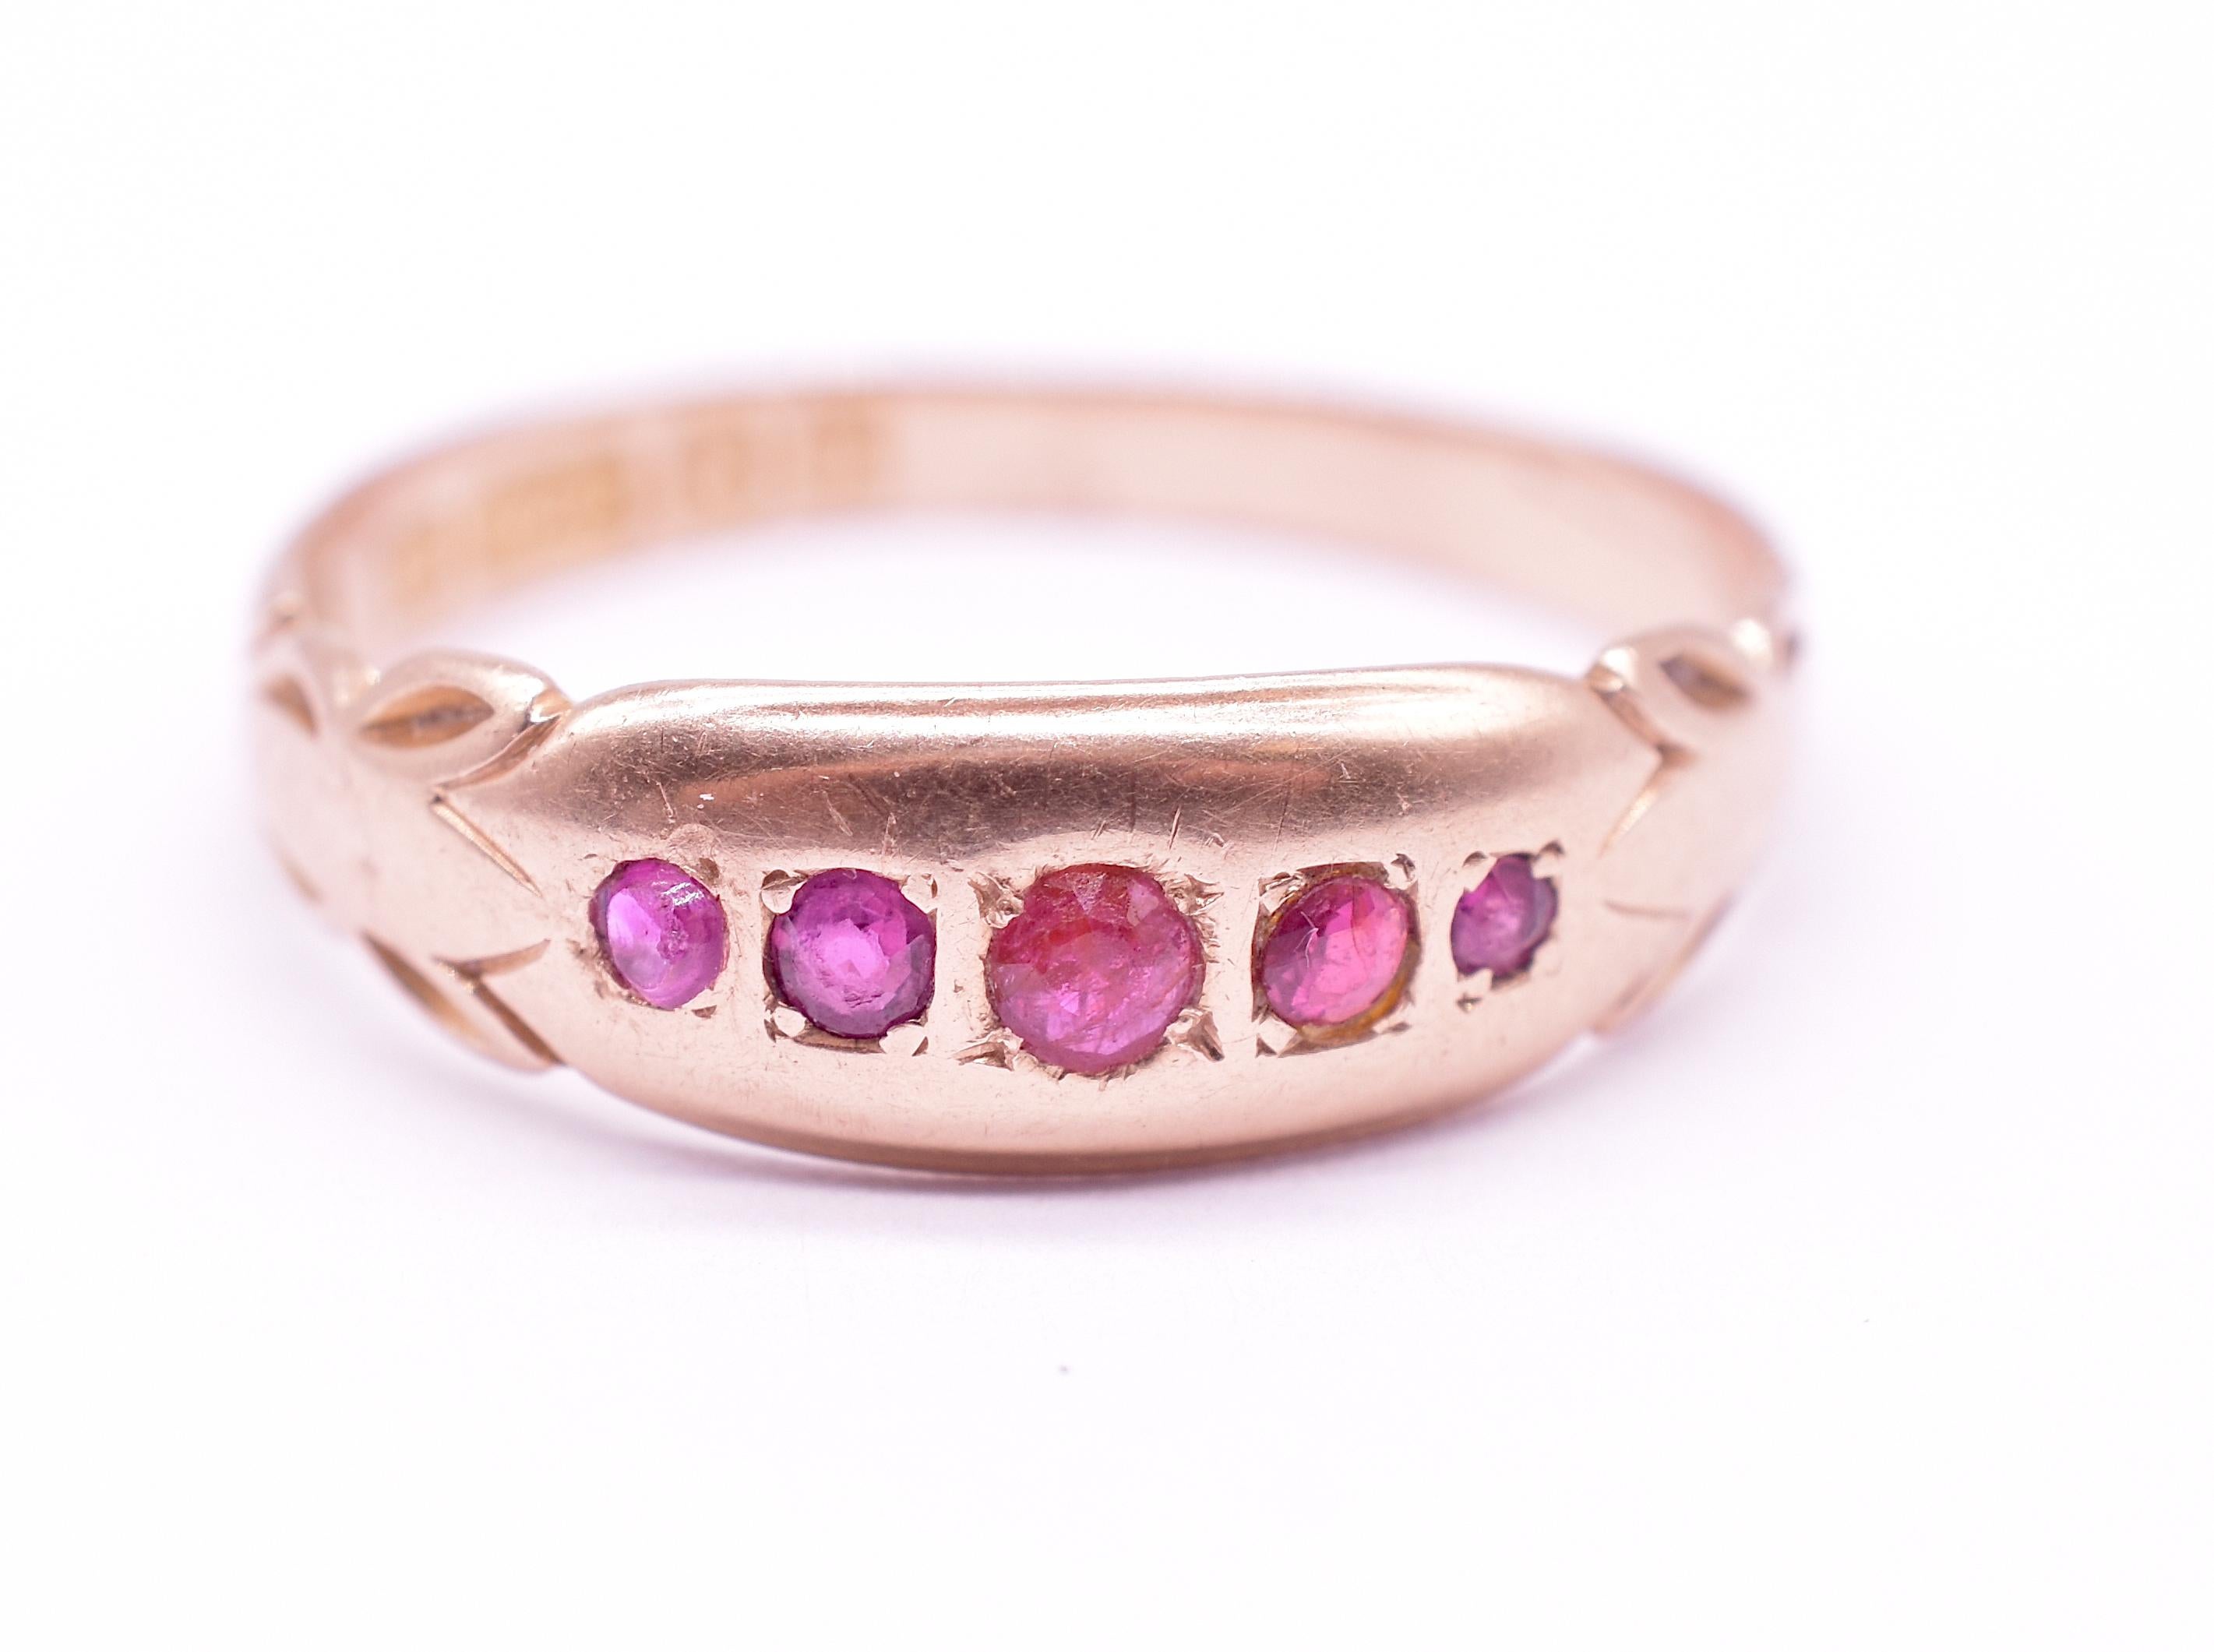 Our 15K Edwardian era ruby ring has 5 round rubies mounted securely along the ring face in carved square mounts. The band has a carved leaf 